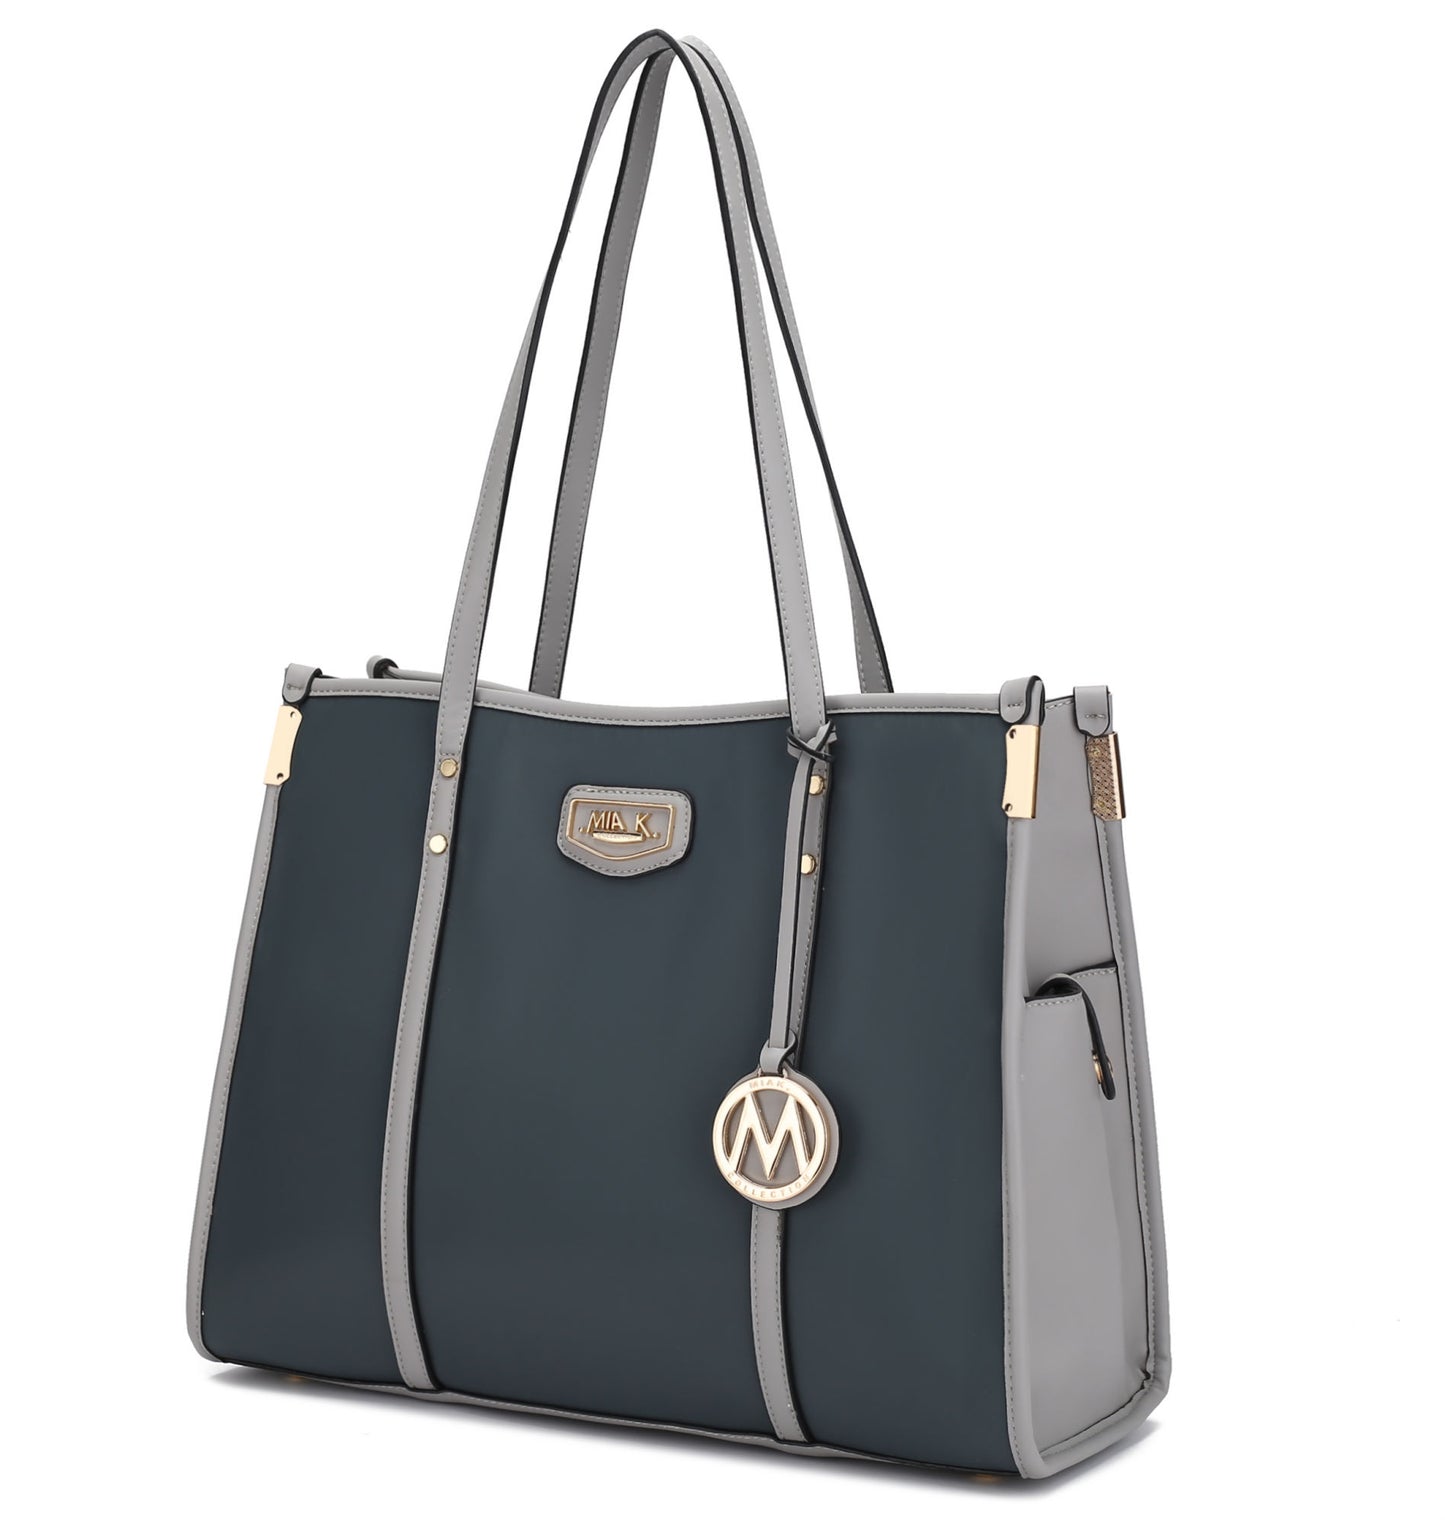 MKF Collection Kindred Oversize Tote Handbag Vegan Leather For Women by Mia k